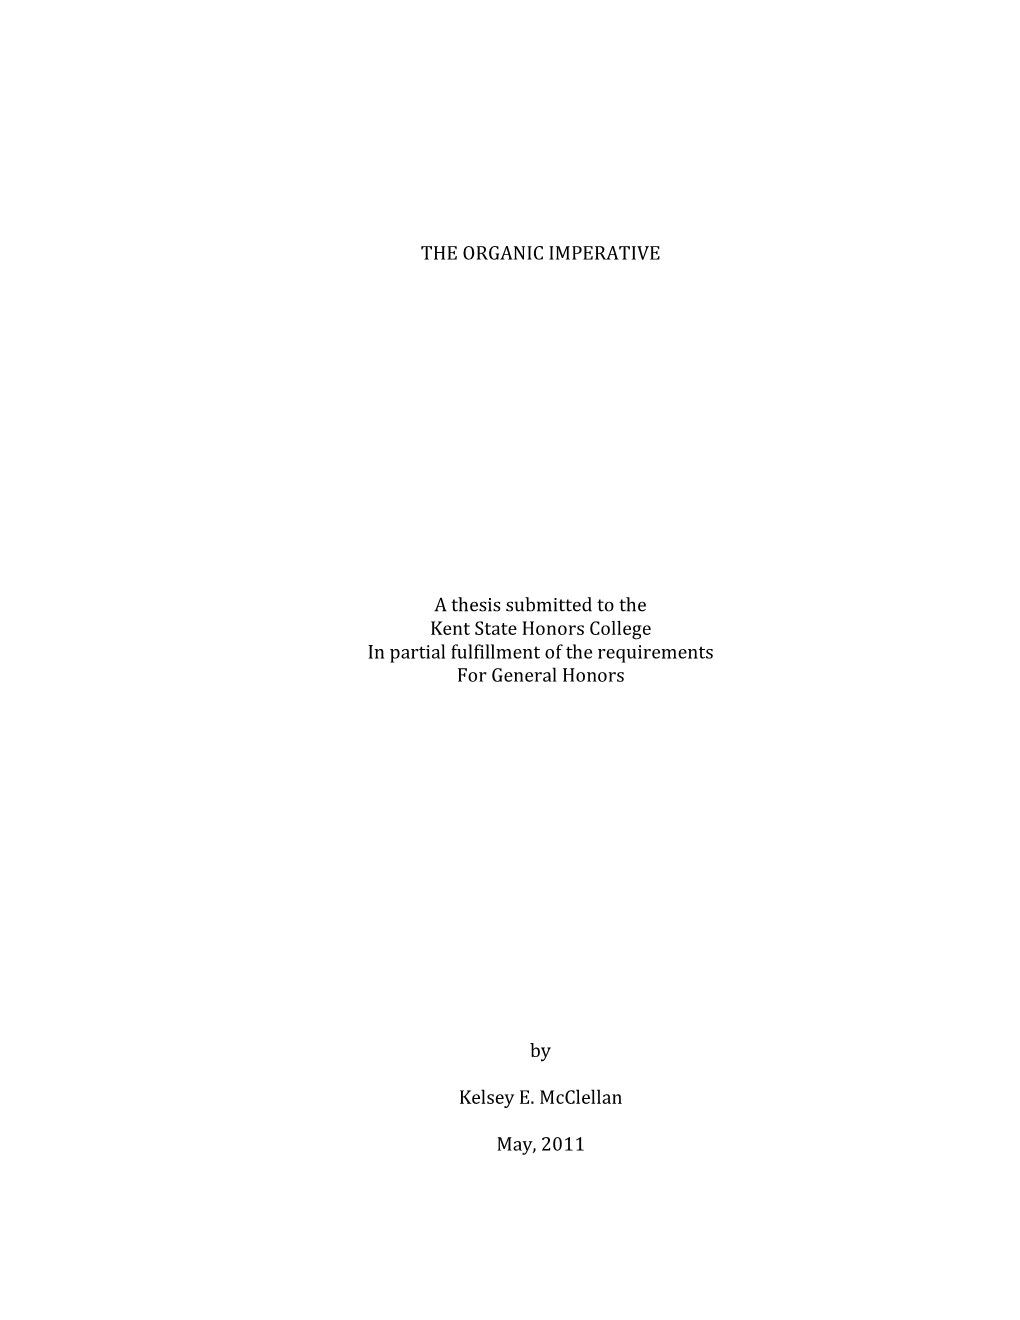 THE ORGANIC IMPERATIVE a Thesis Submitted to the Kent State Honors College in Partial Fulfillment of the Requirements for Genera